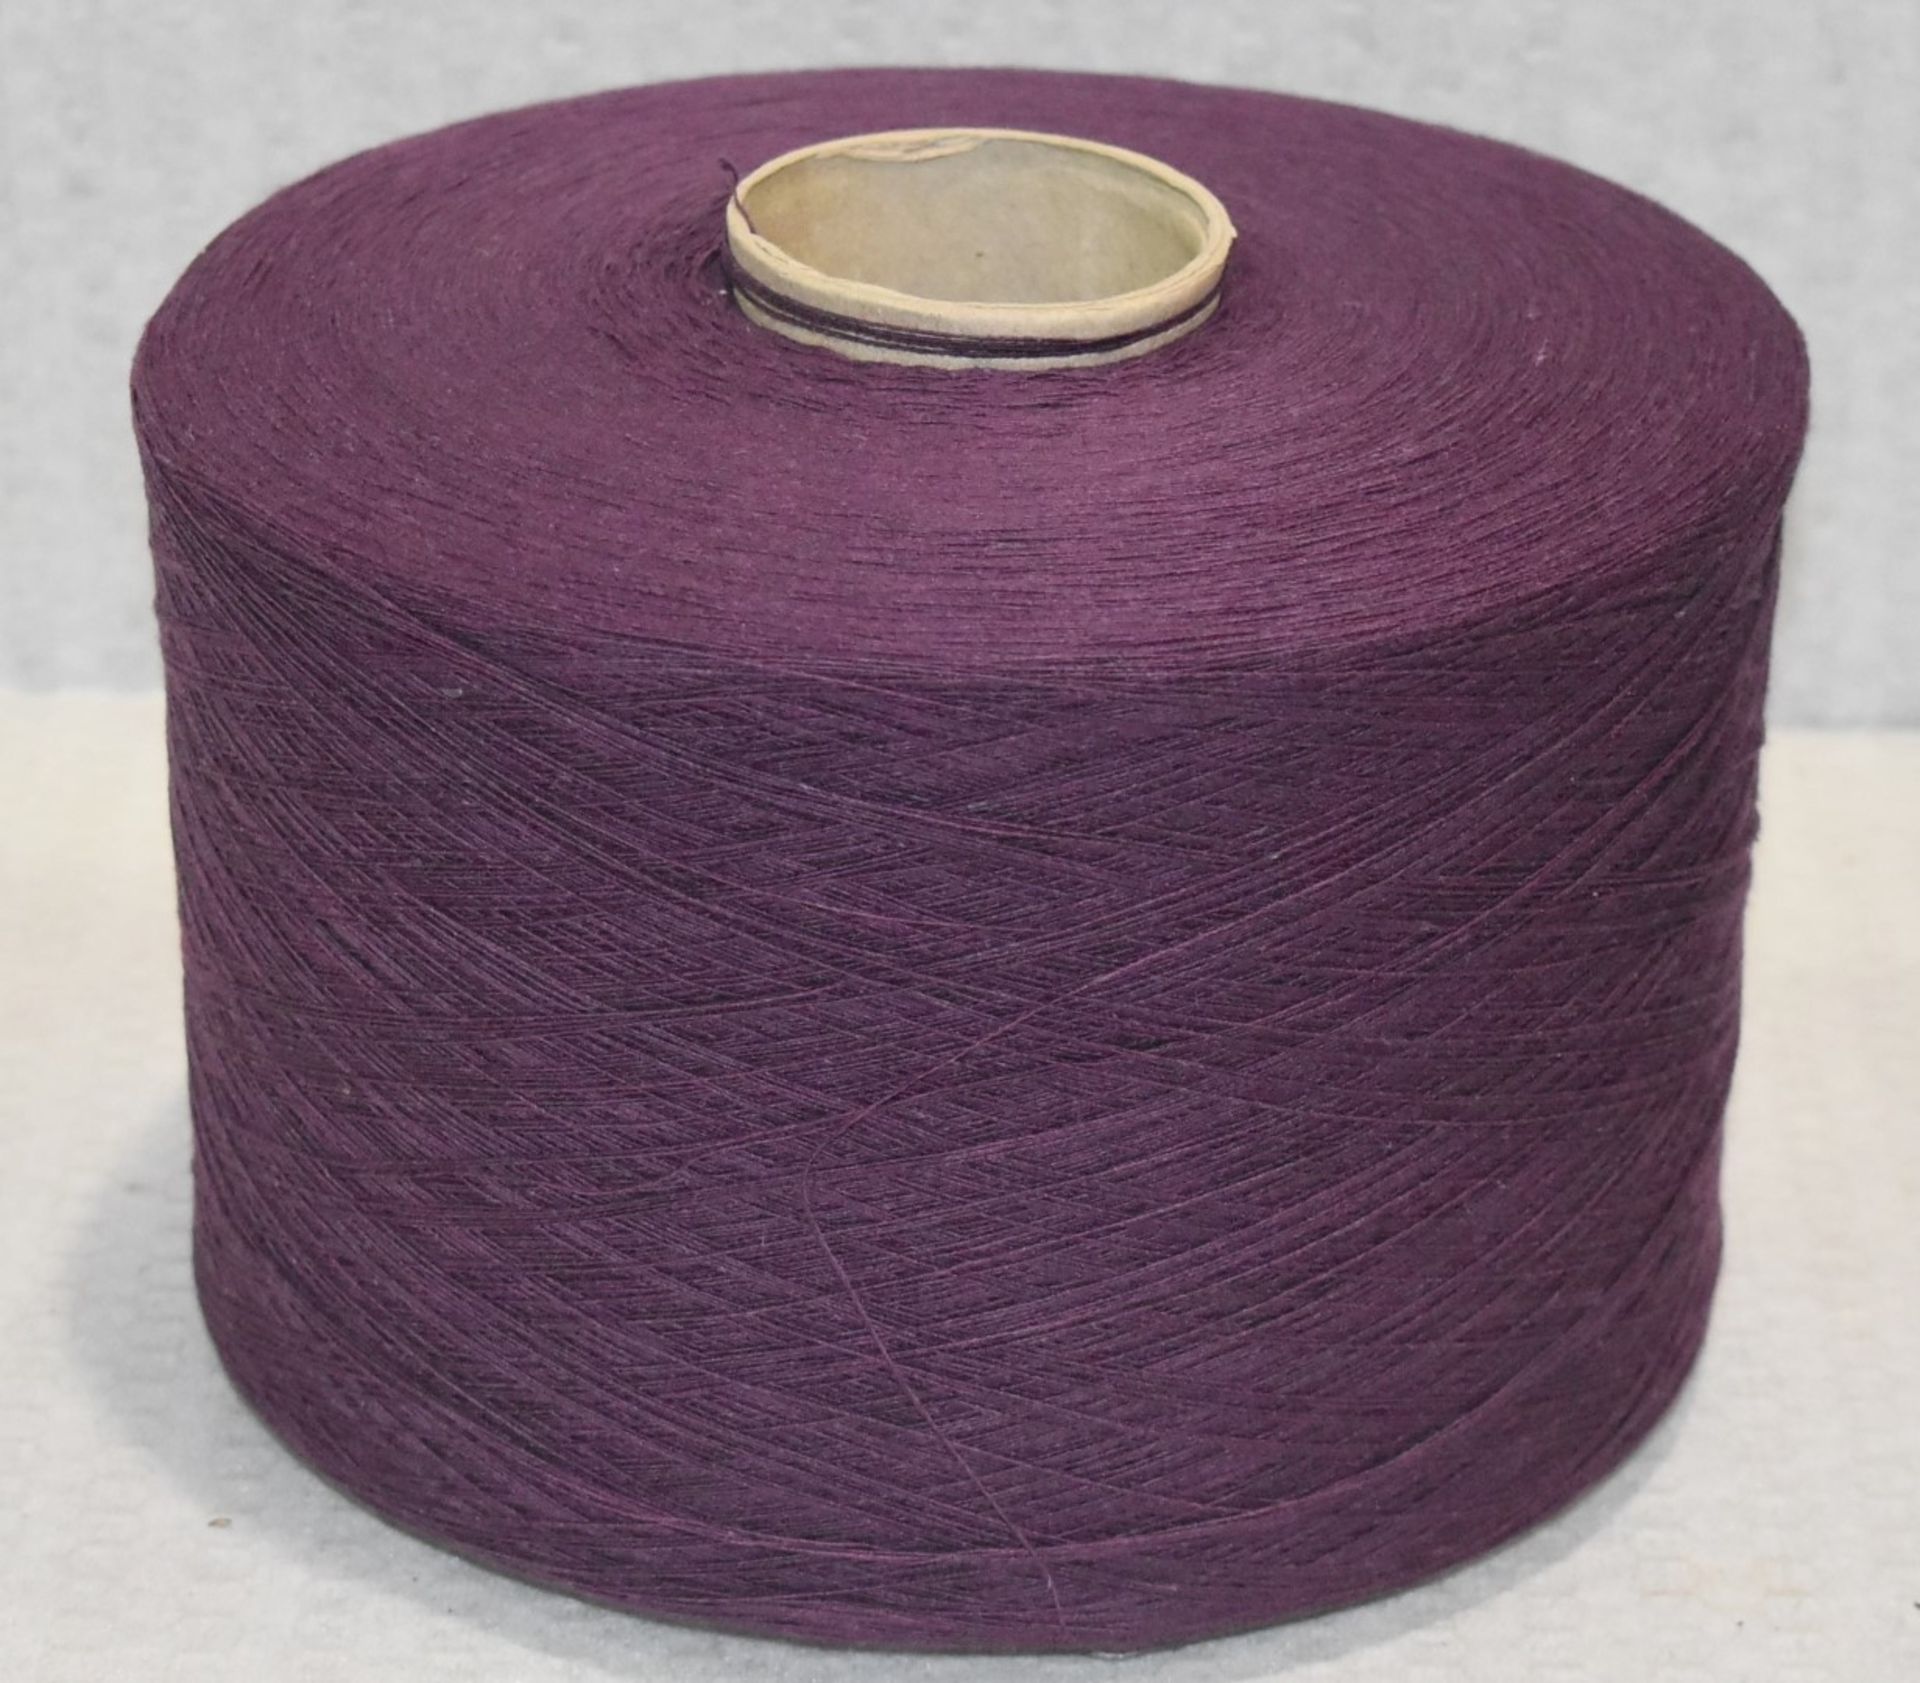 1 x Cone of 1/13 MicroCotton Knitting Yarn - Purple - Approx Weight: 2,300g - New Stock ABL Yarn - Image 3 of 13